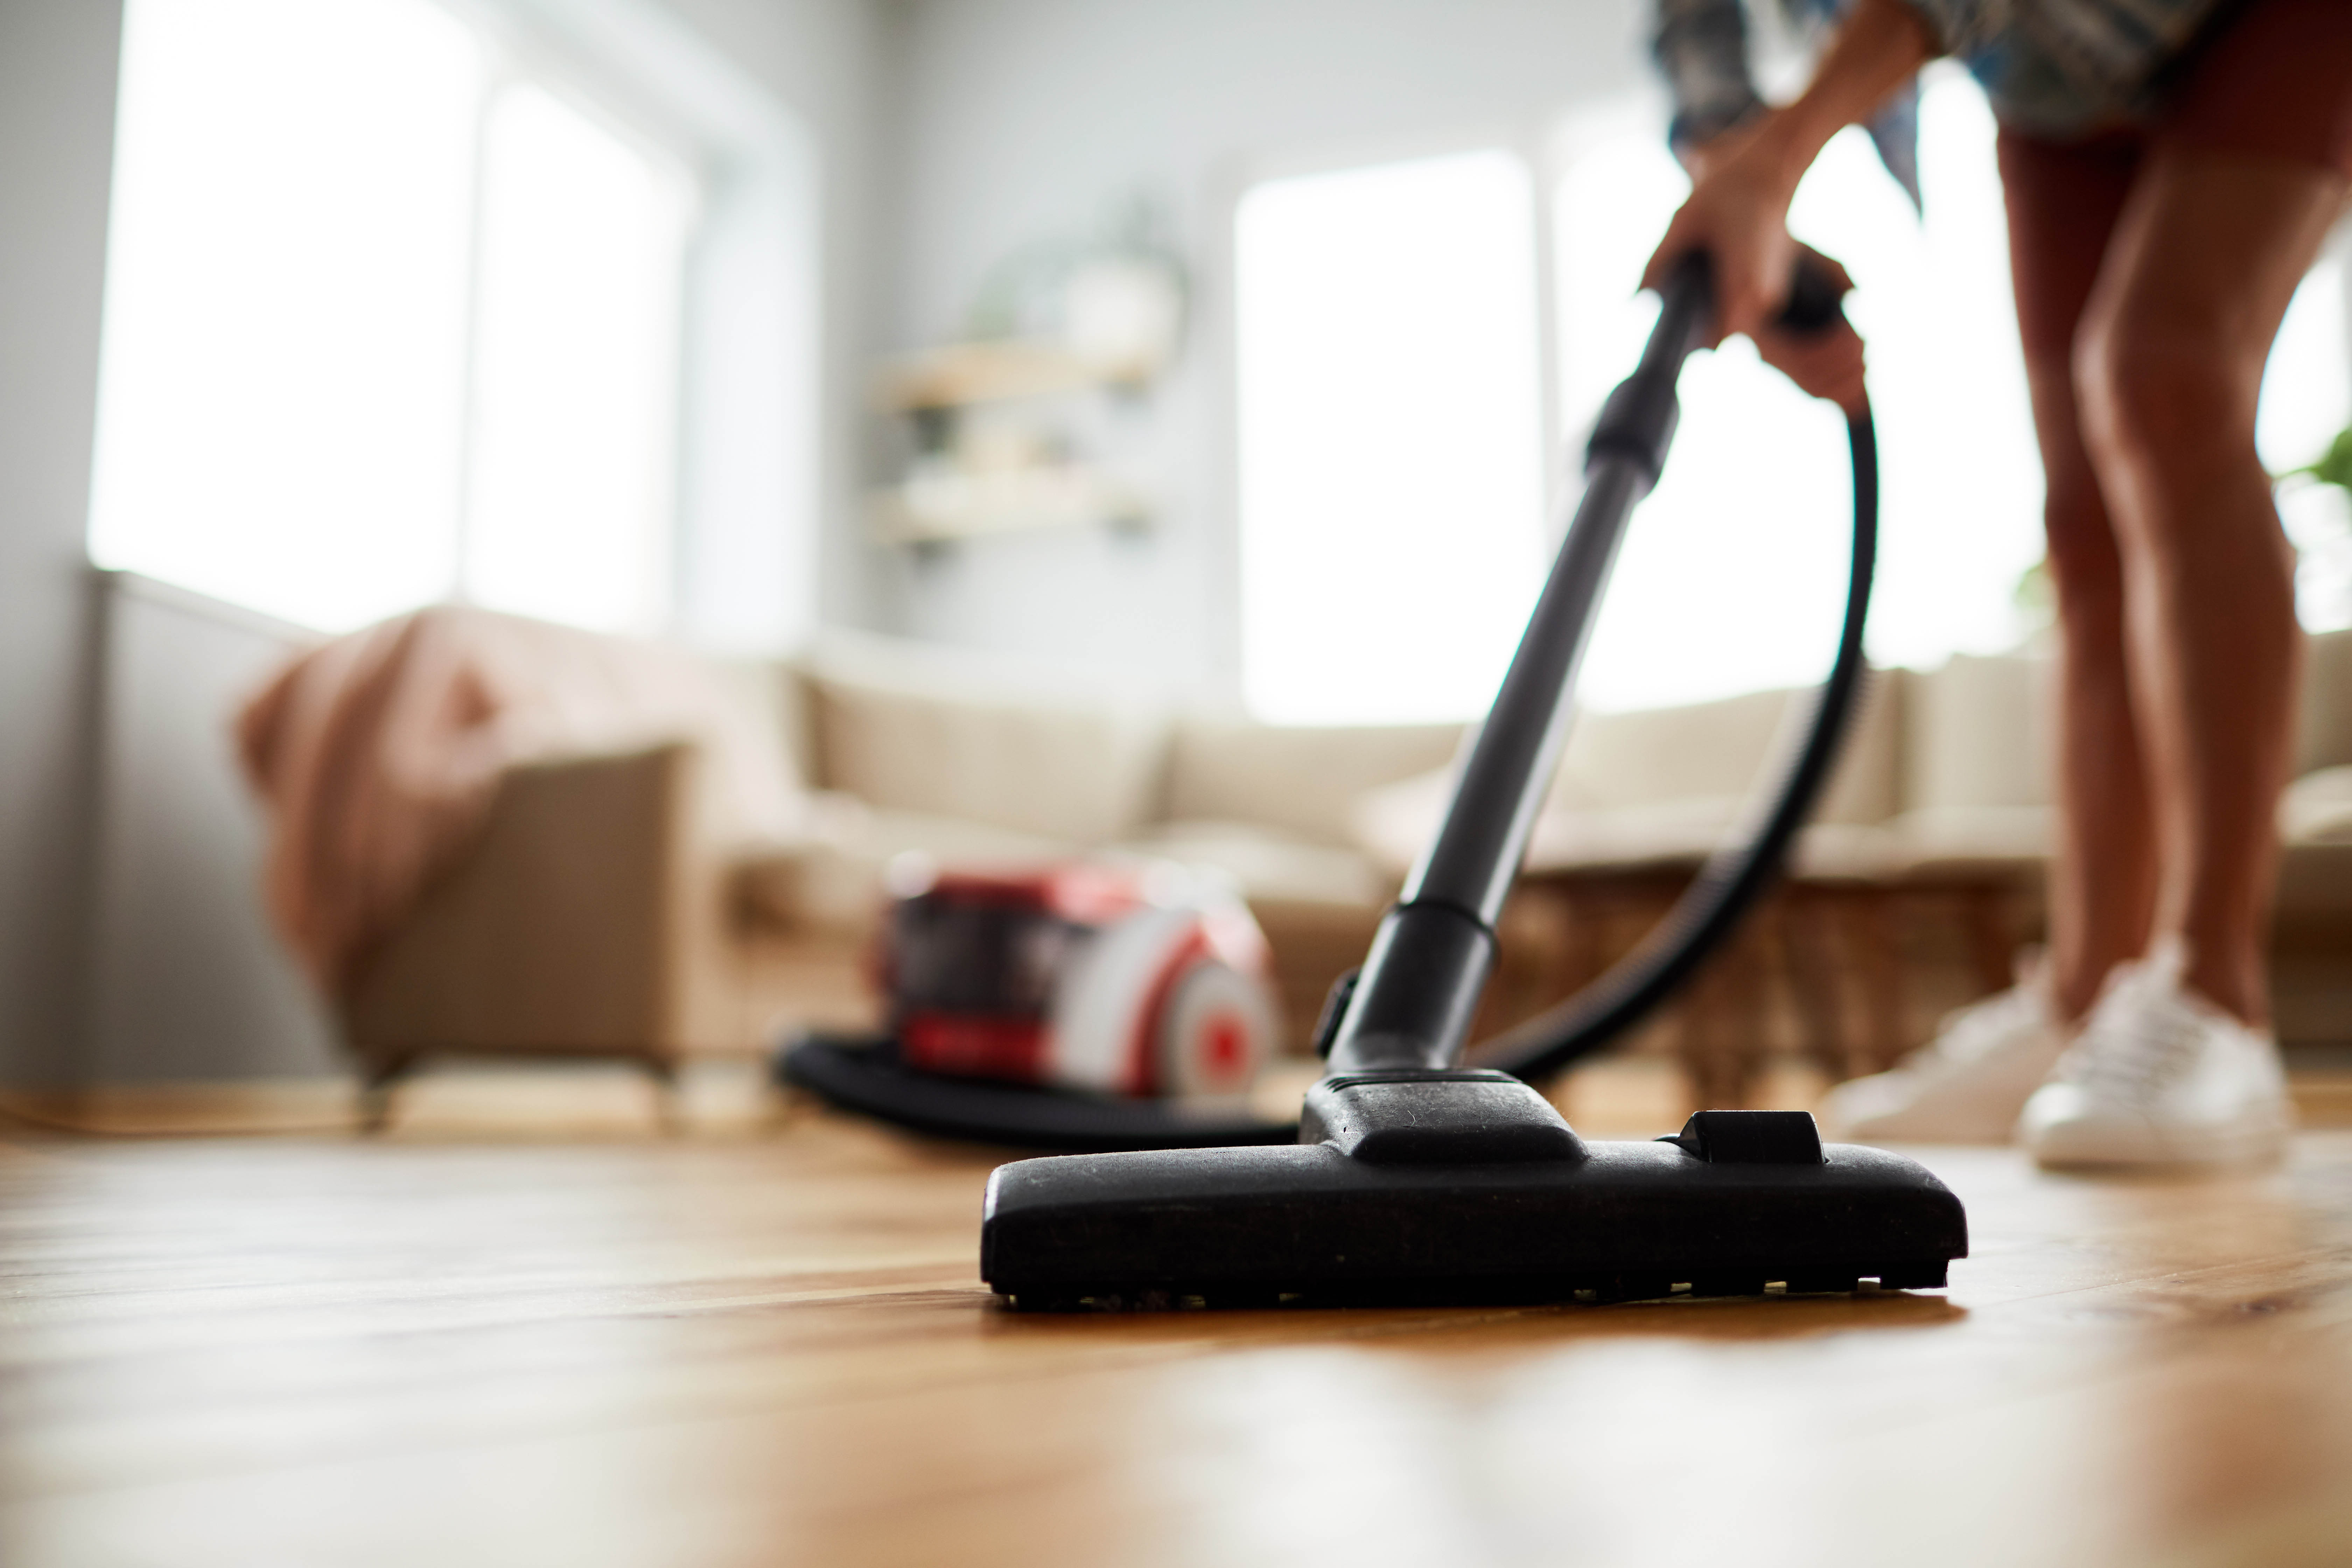 A person vacuums the floor of a home.